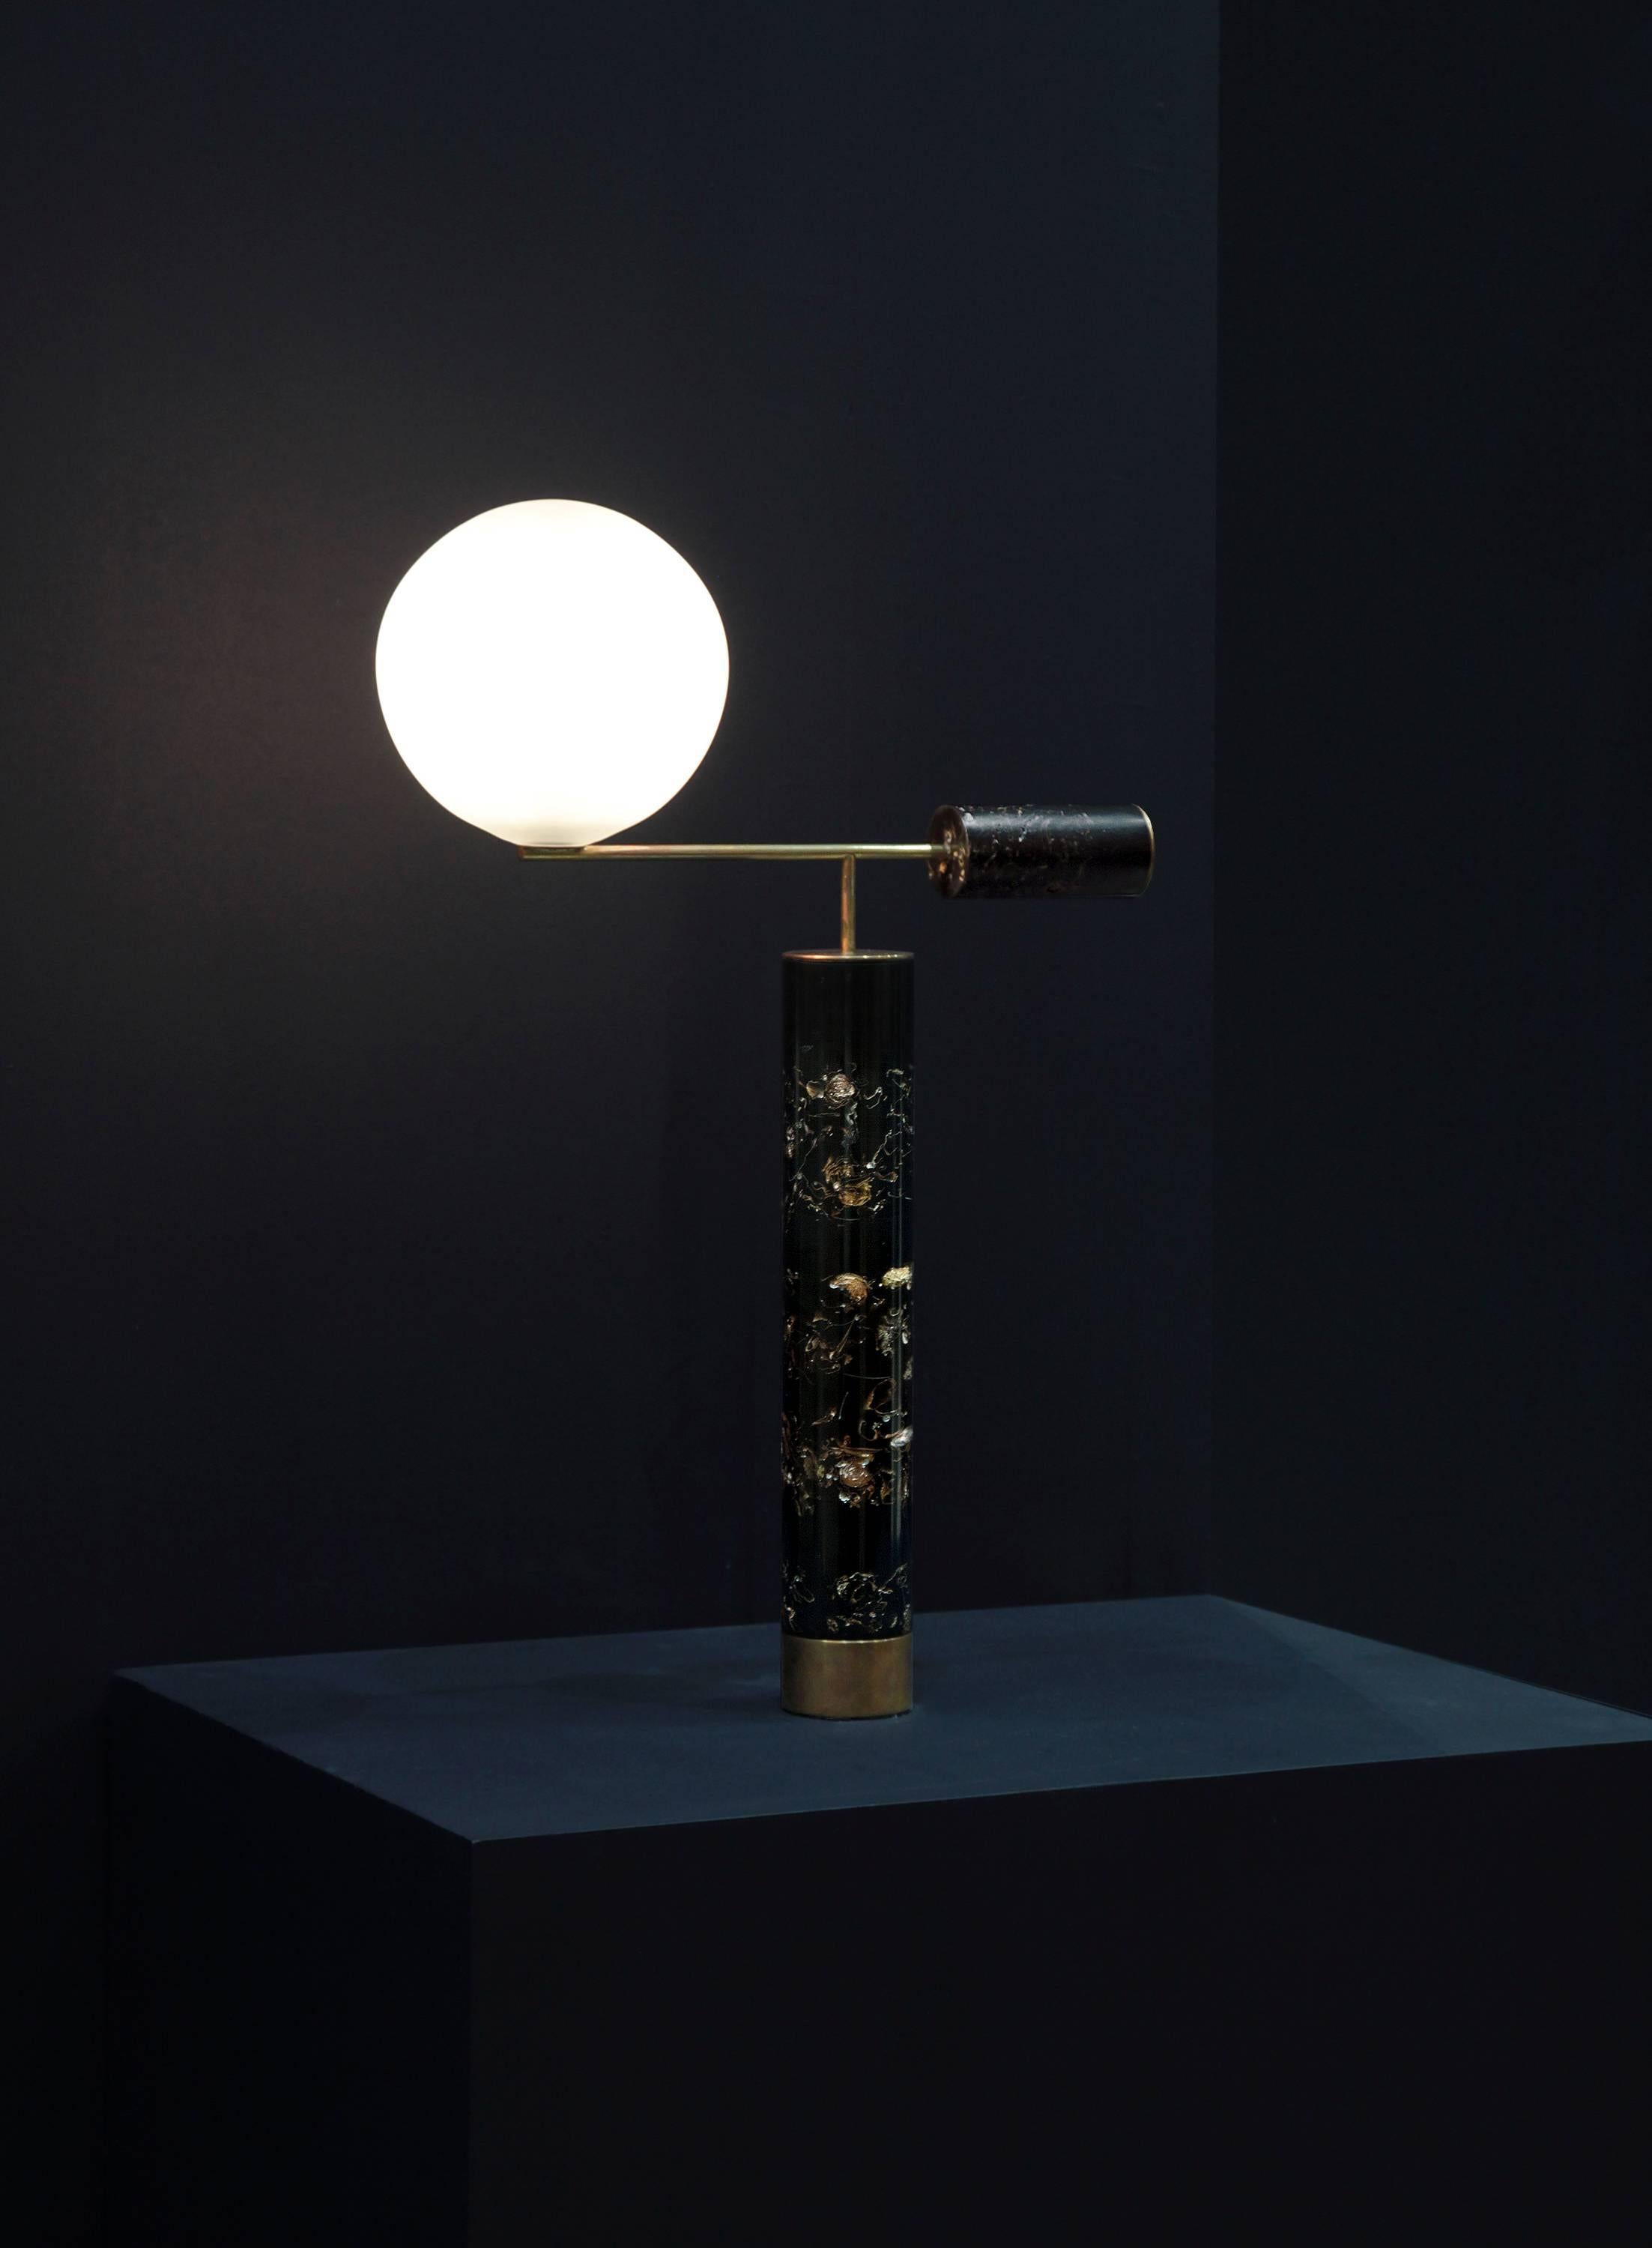 Table lamp, 2017

Brass, flowers, resin, handblown glass

White or black resin version available

Unique piece.

Measures: H 23.6